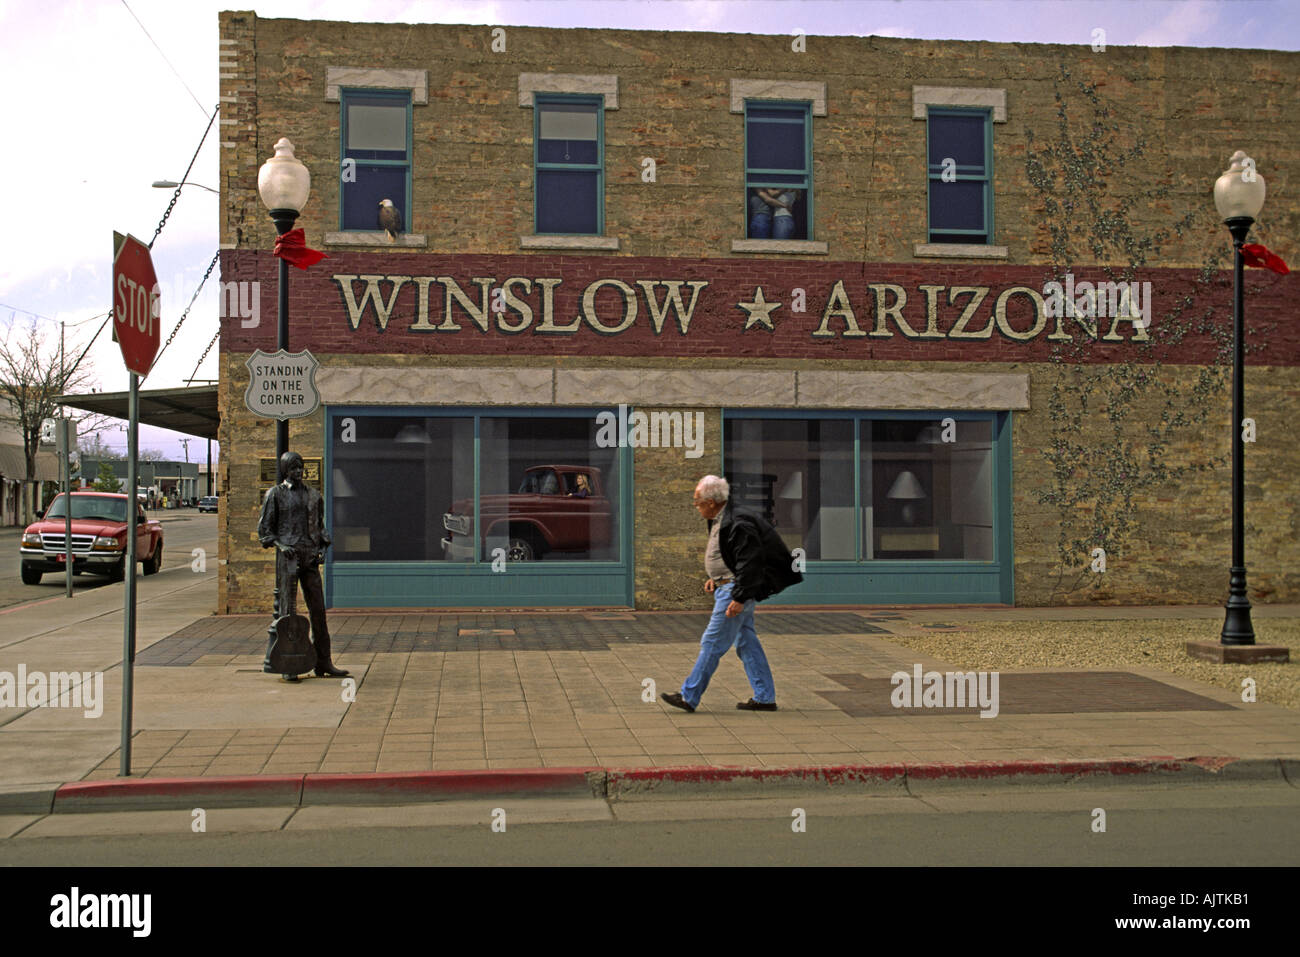 Standin' on a Corner, Eagles song, statue, mural on Route 66 in Winslow, Arizona, USA Stock Photo